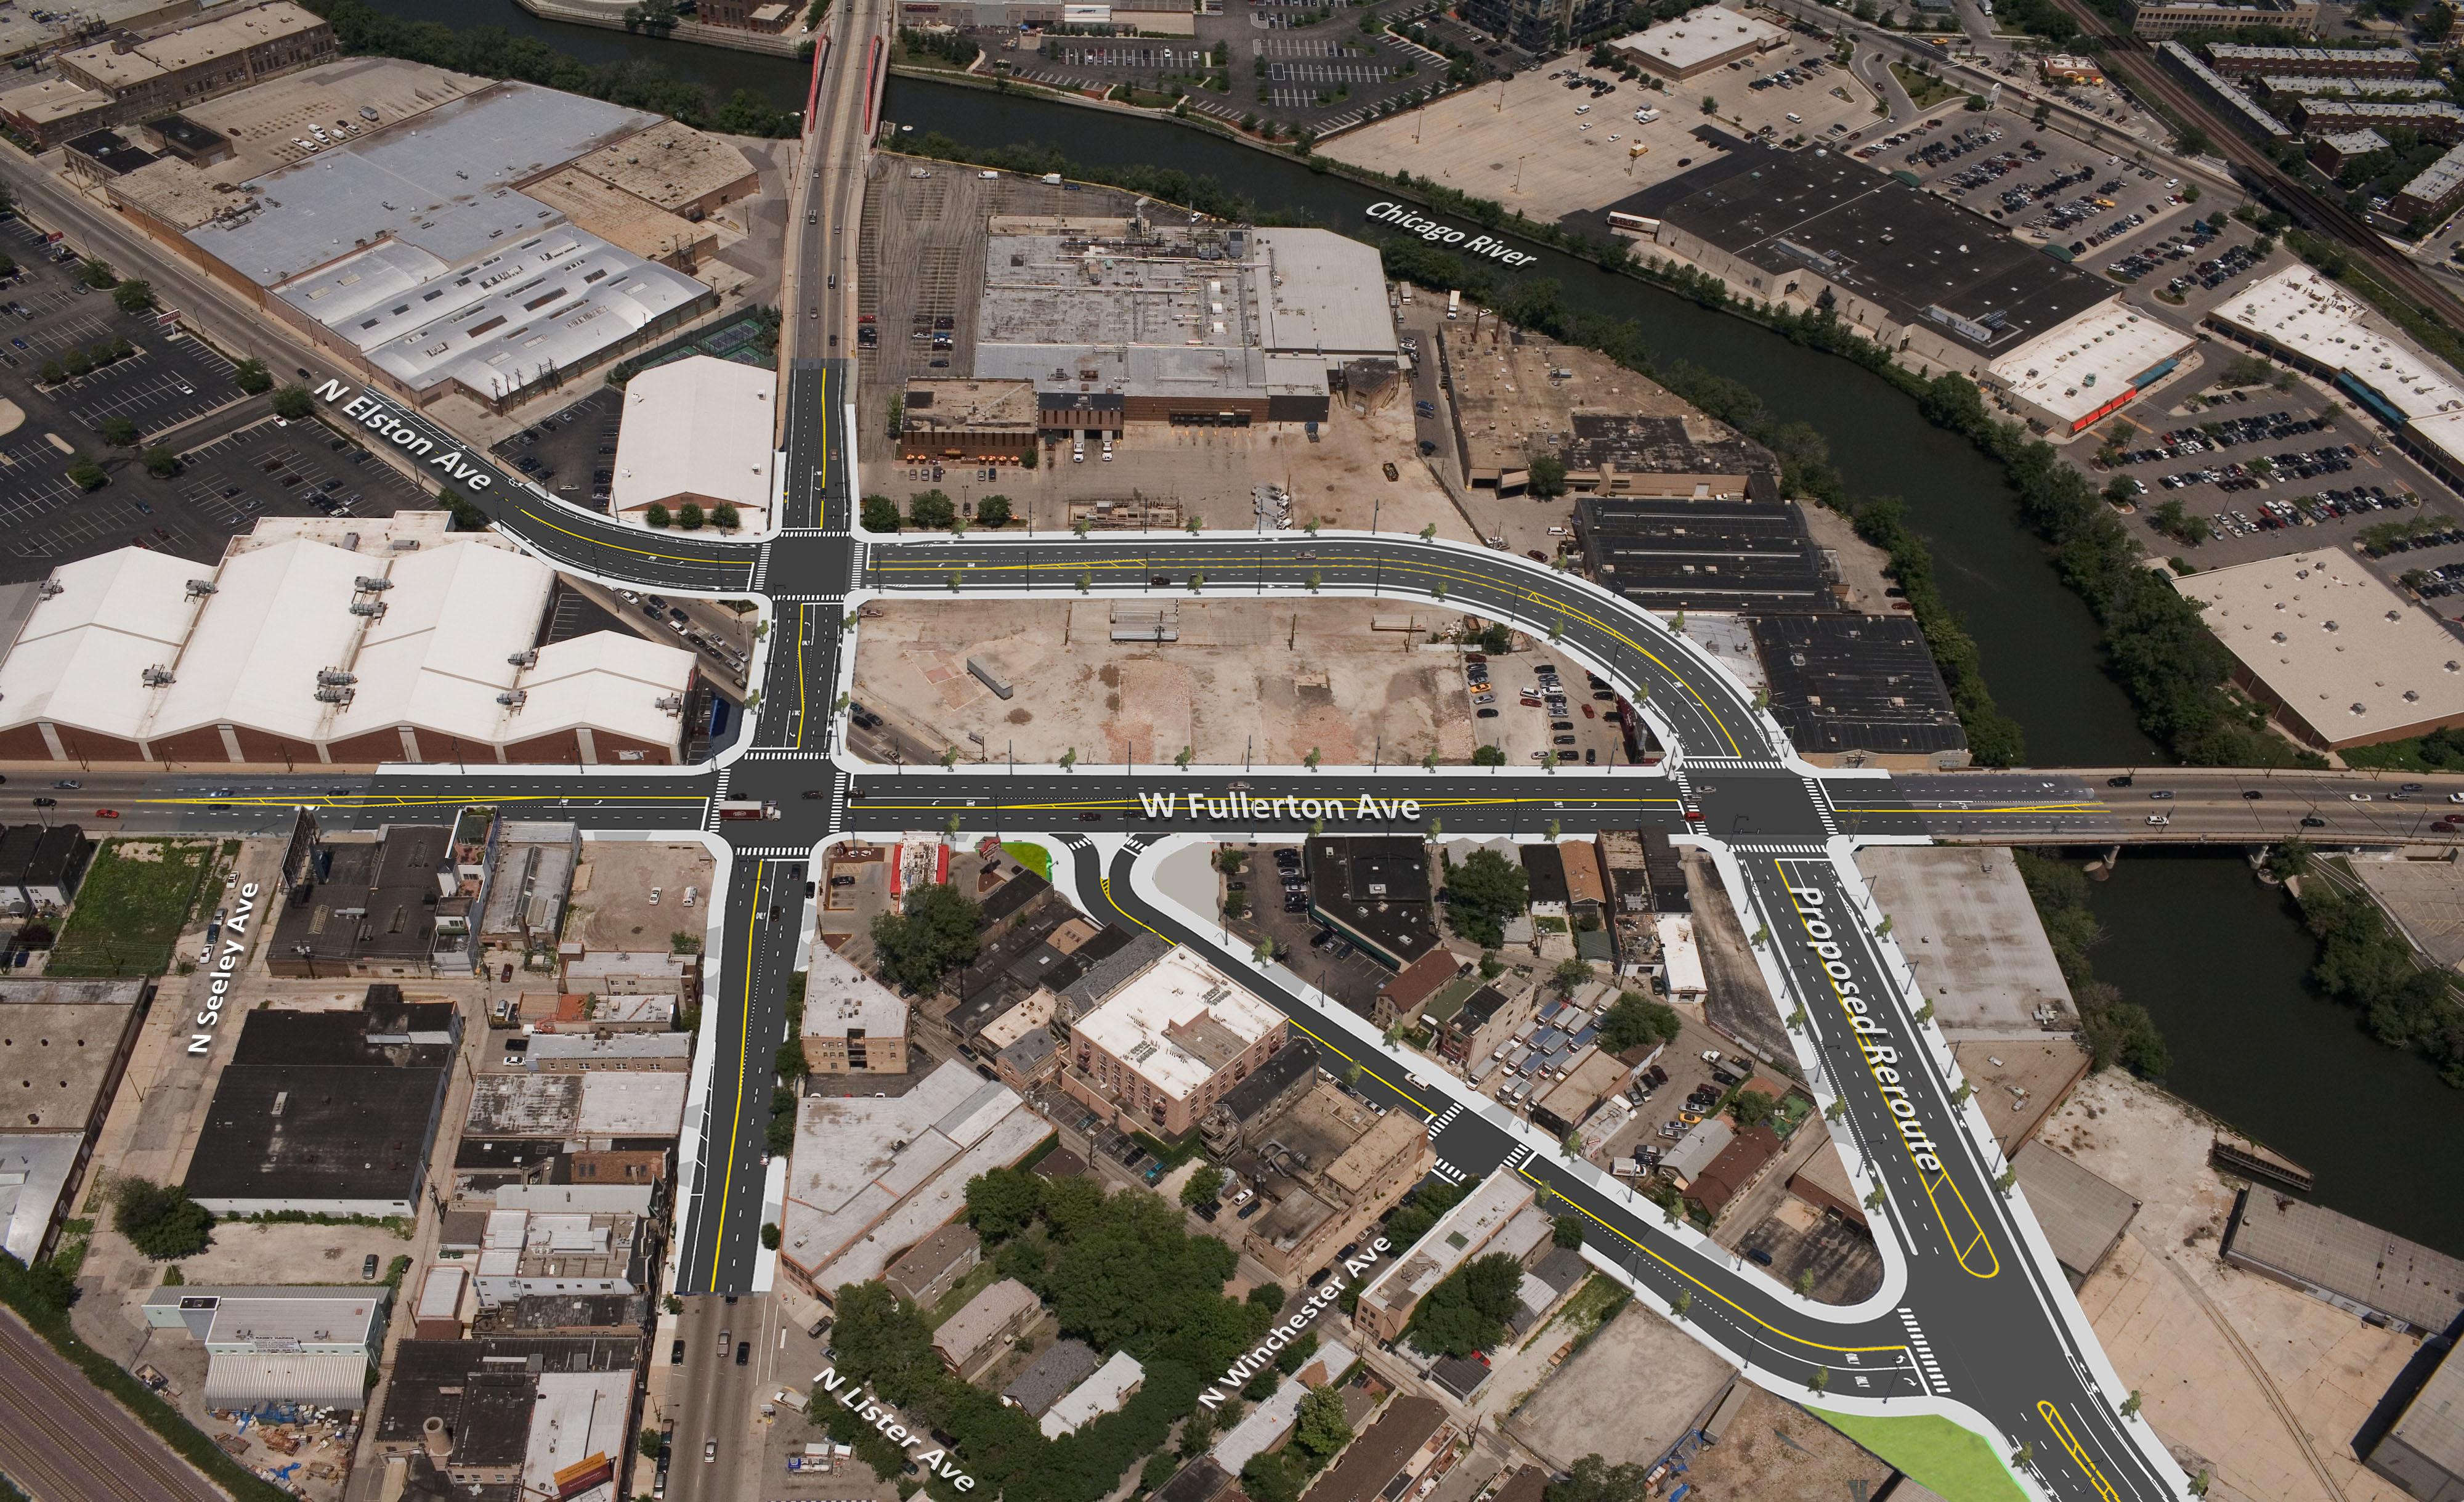 A bird’s eye view of the proposed reroute of Elston Avenue. (Credit: Chicago Department of Transportation)